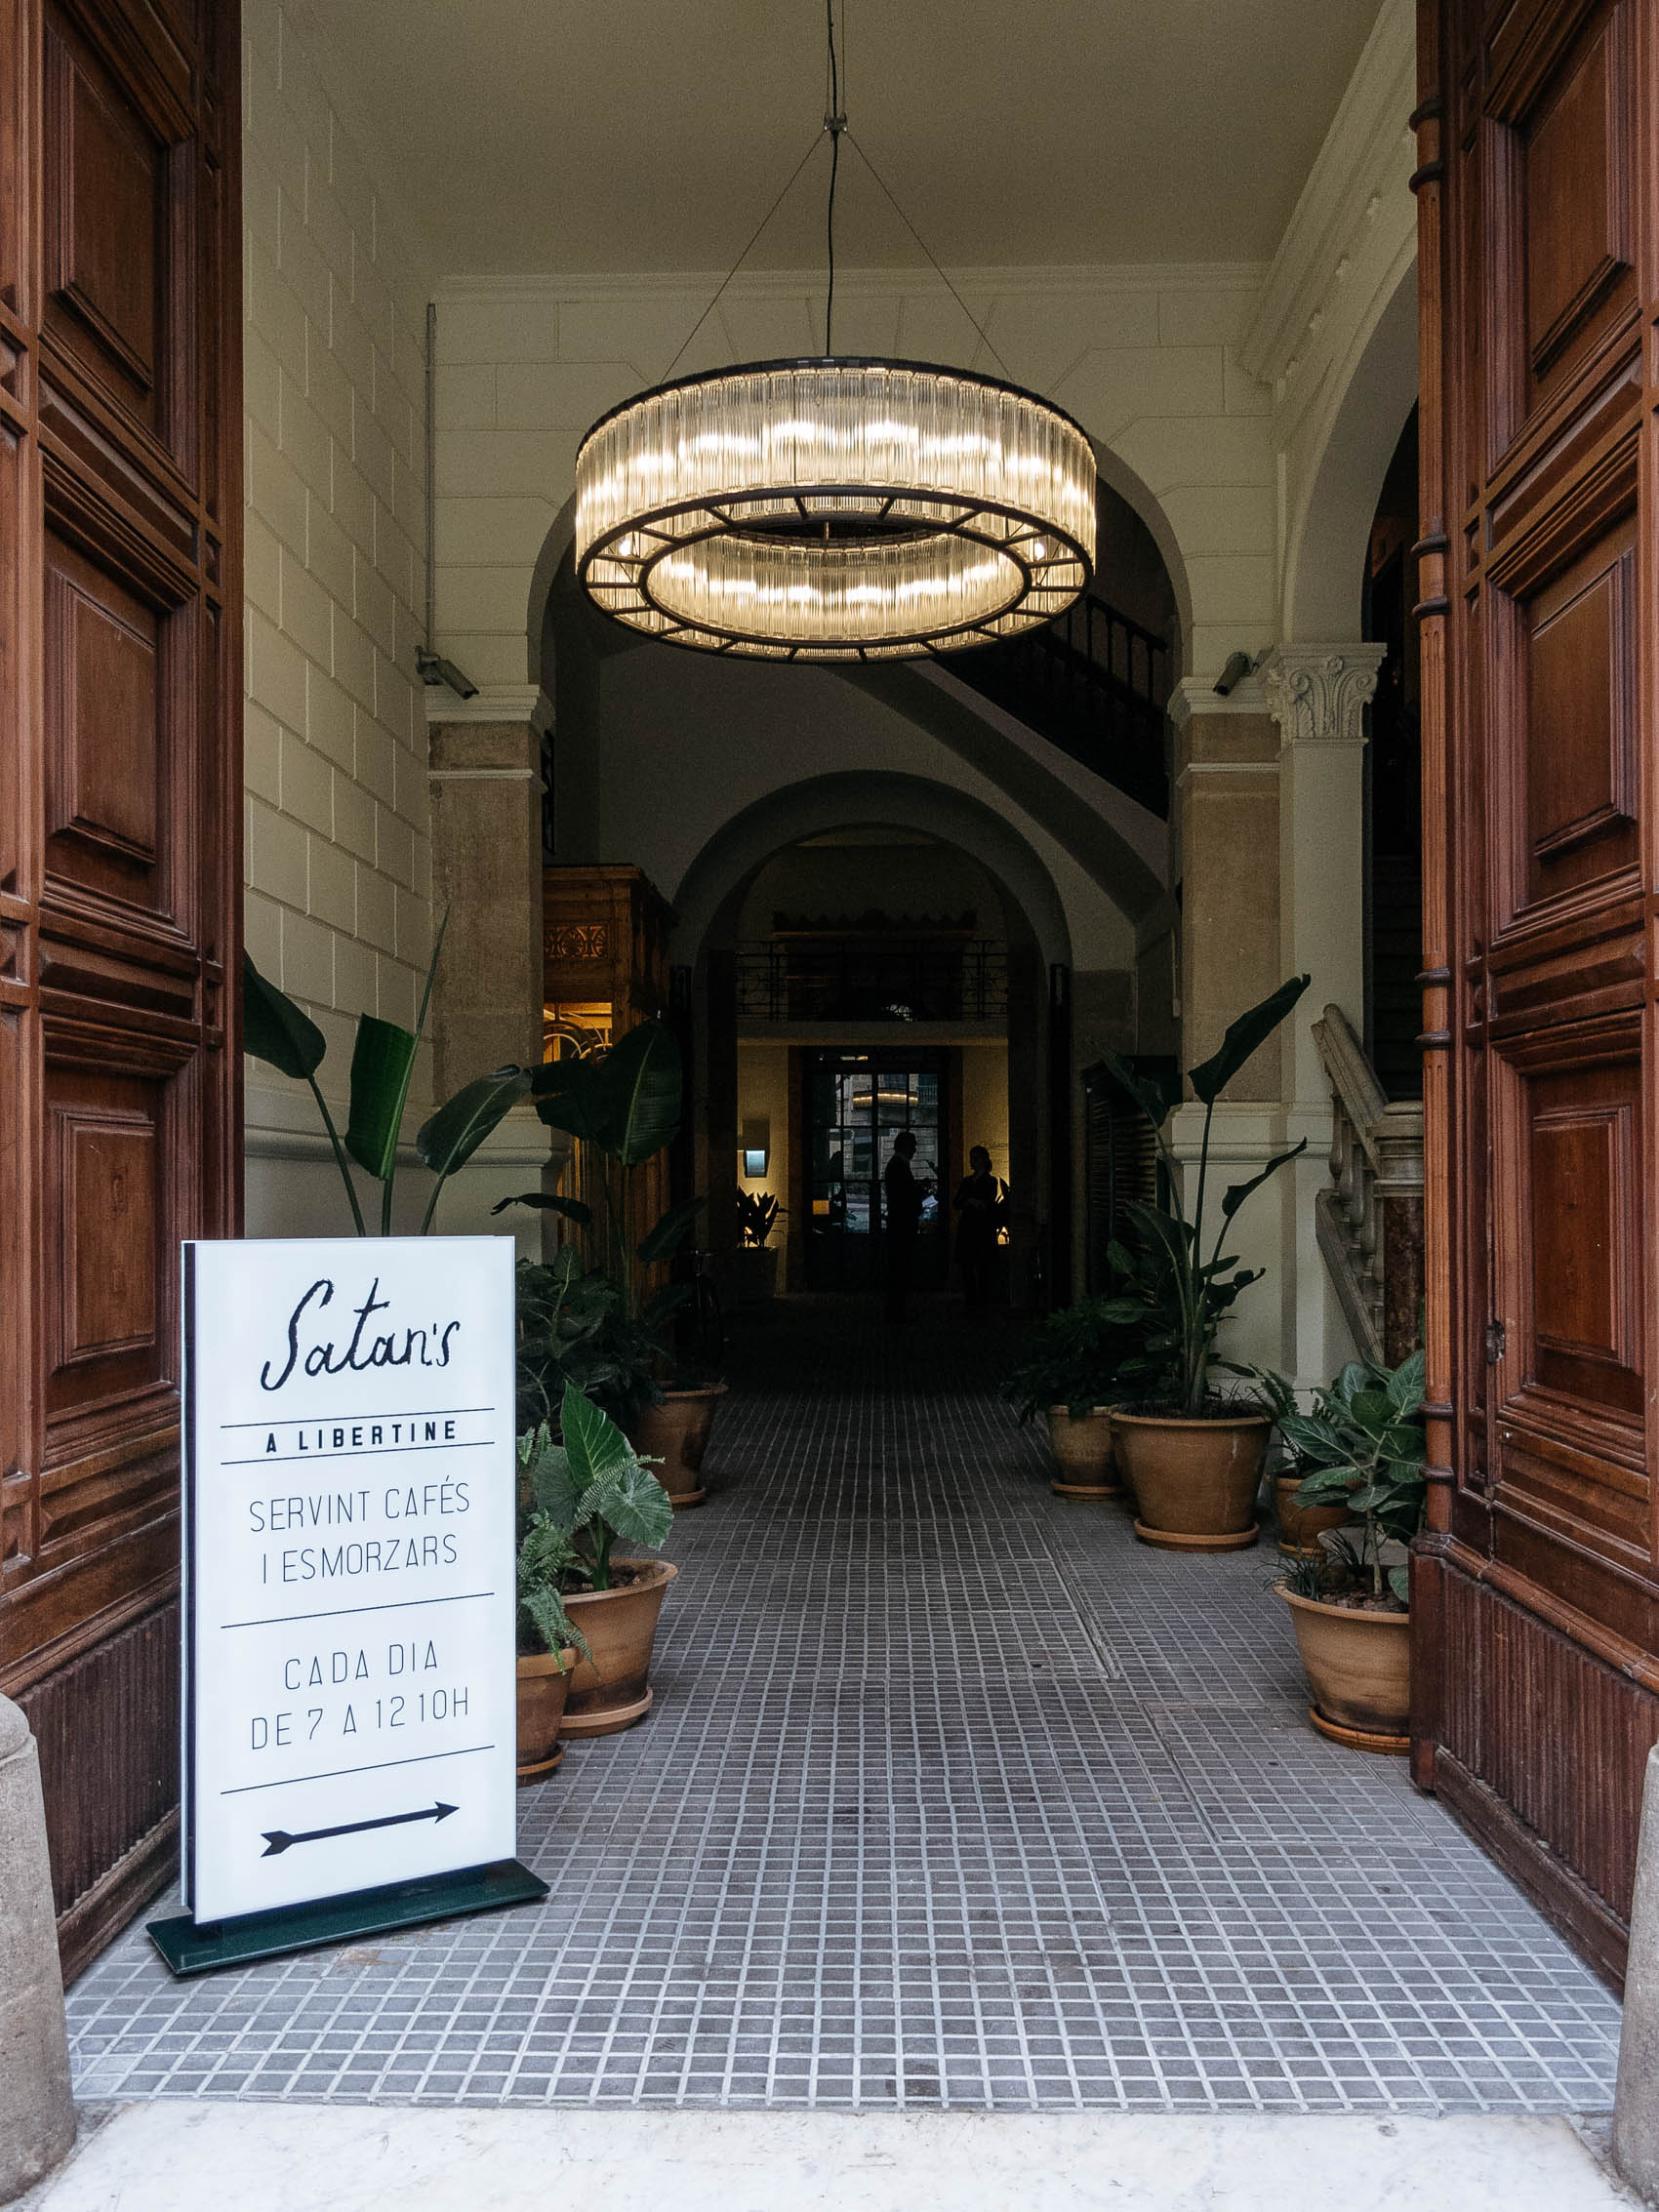 Hotel Casa Bonay in Barcelona is beautifully designed and decorated and has a real homey feel, with Satan's Coffee, Libertine restaurant and Mother juices in the lobby area.